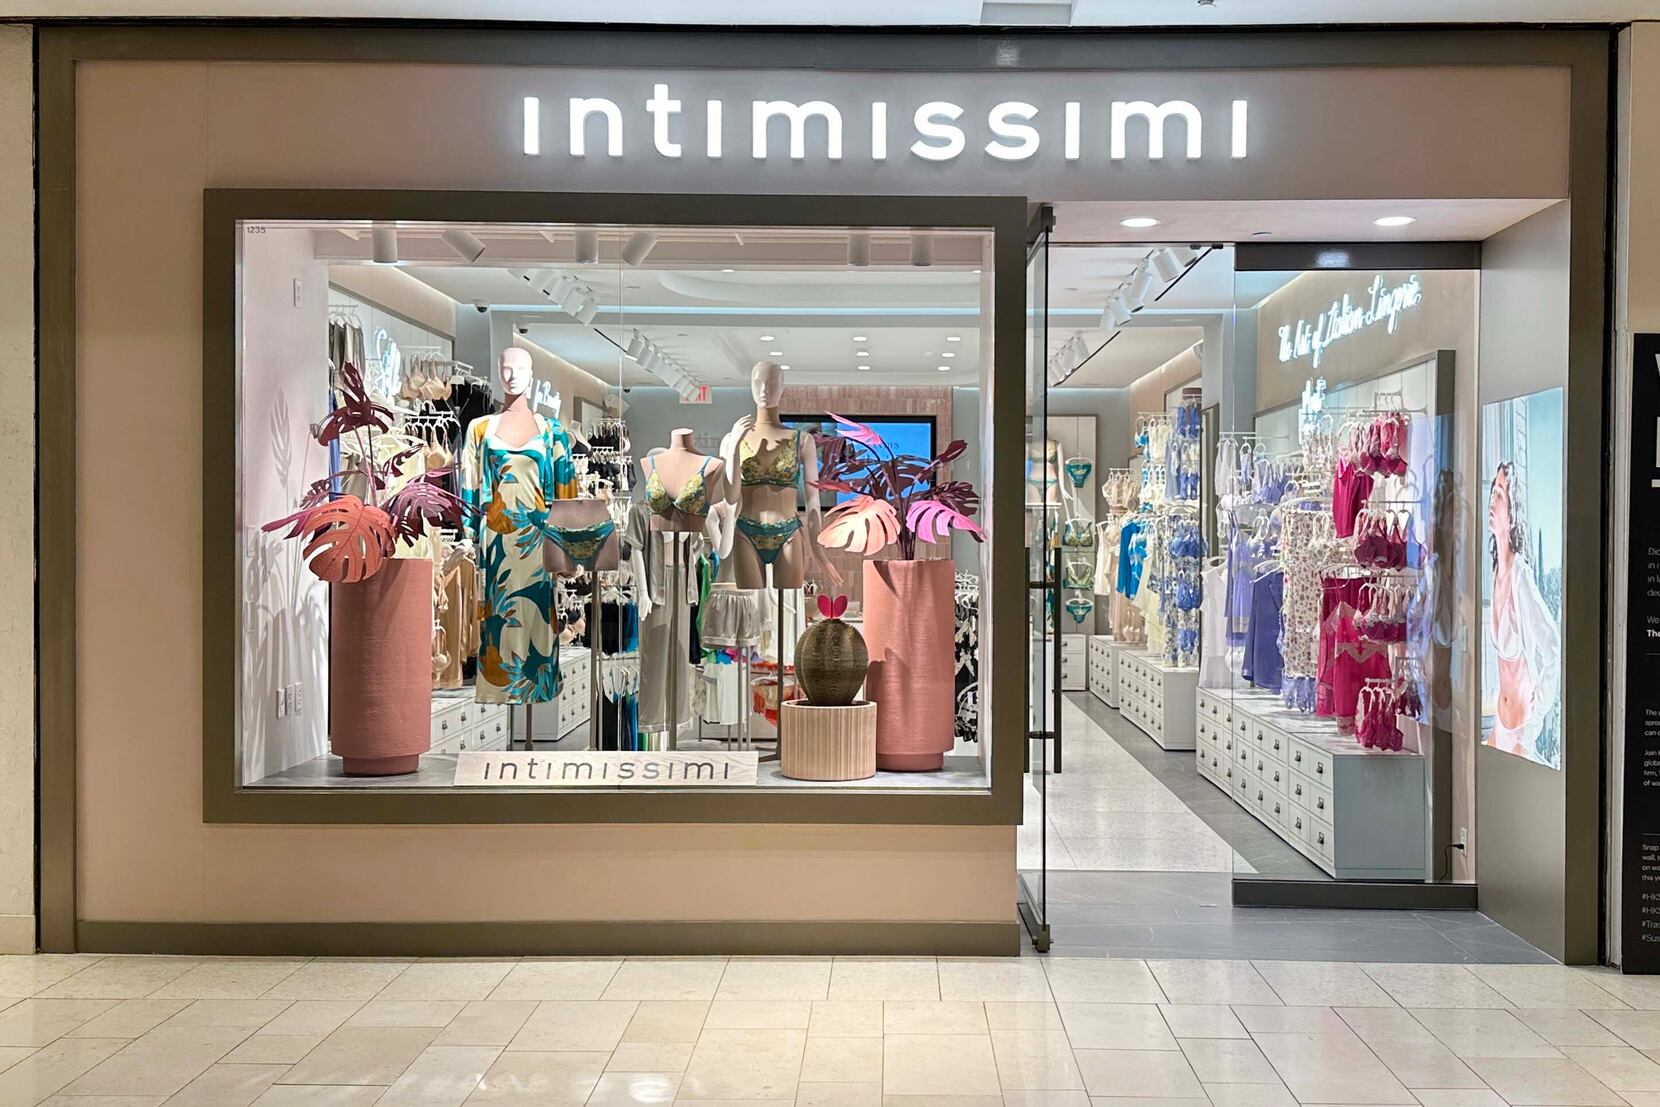 Go ahead and discover Intimissimi's new arrivals for women.